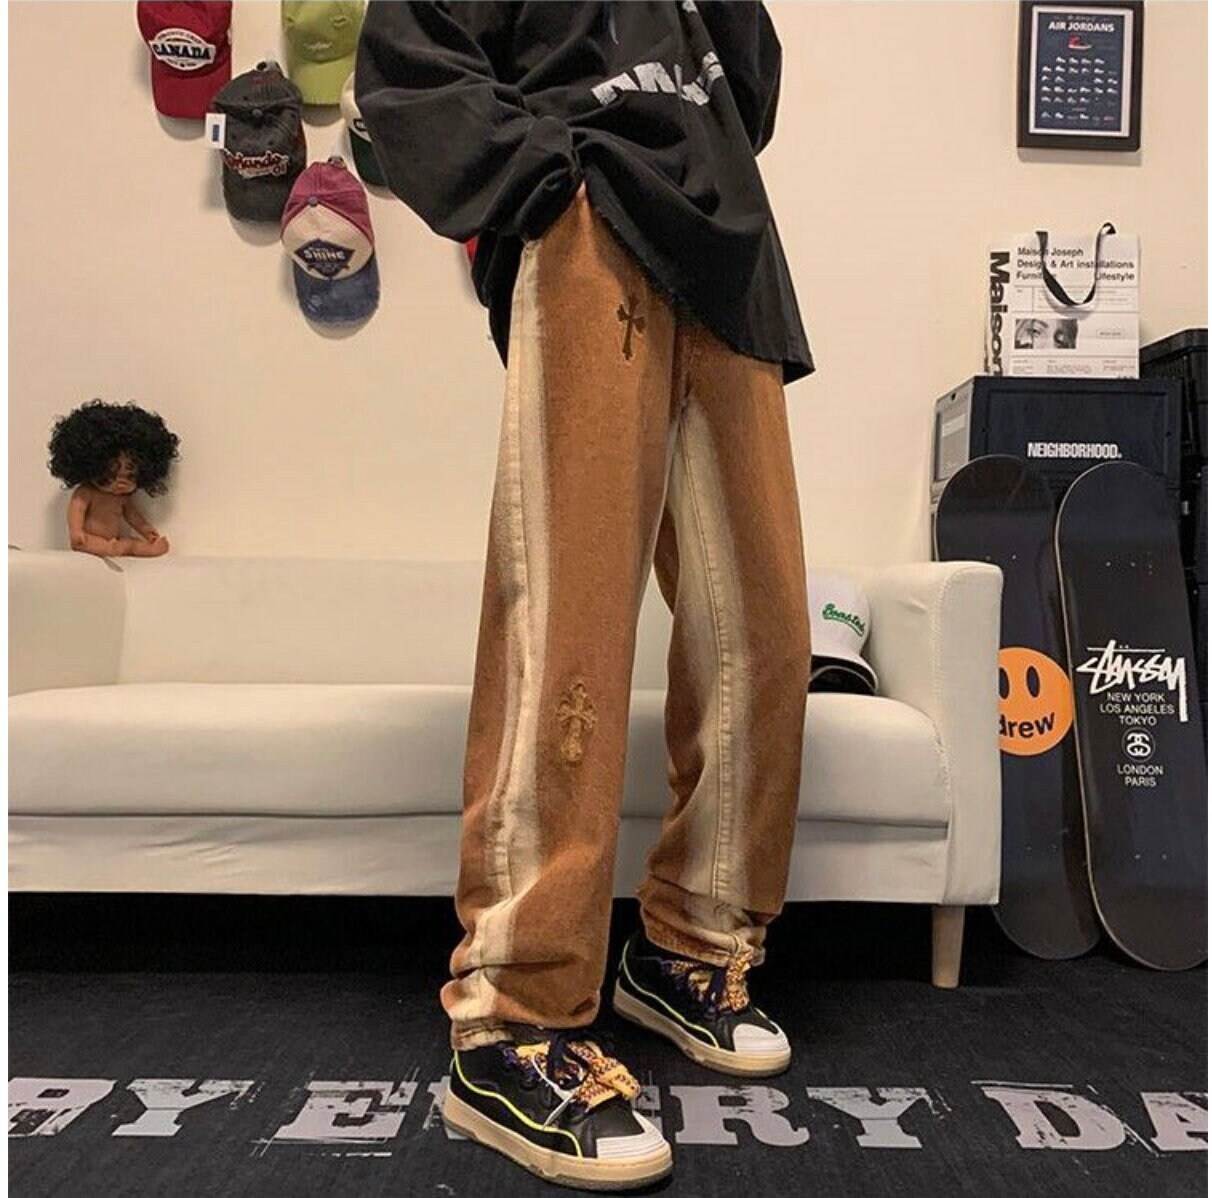 Y2k Clothes Casual Yellow Chrome Hearts Streetwear Grunge Retro Vintage Baggy Jeans Straight Trousers Wide Leg Pants For Women Streetwear